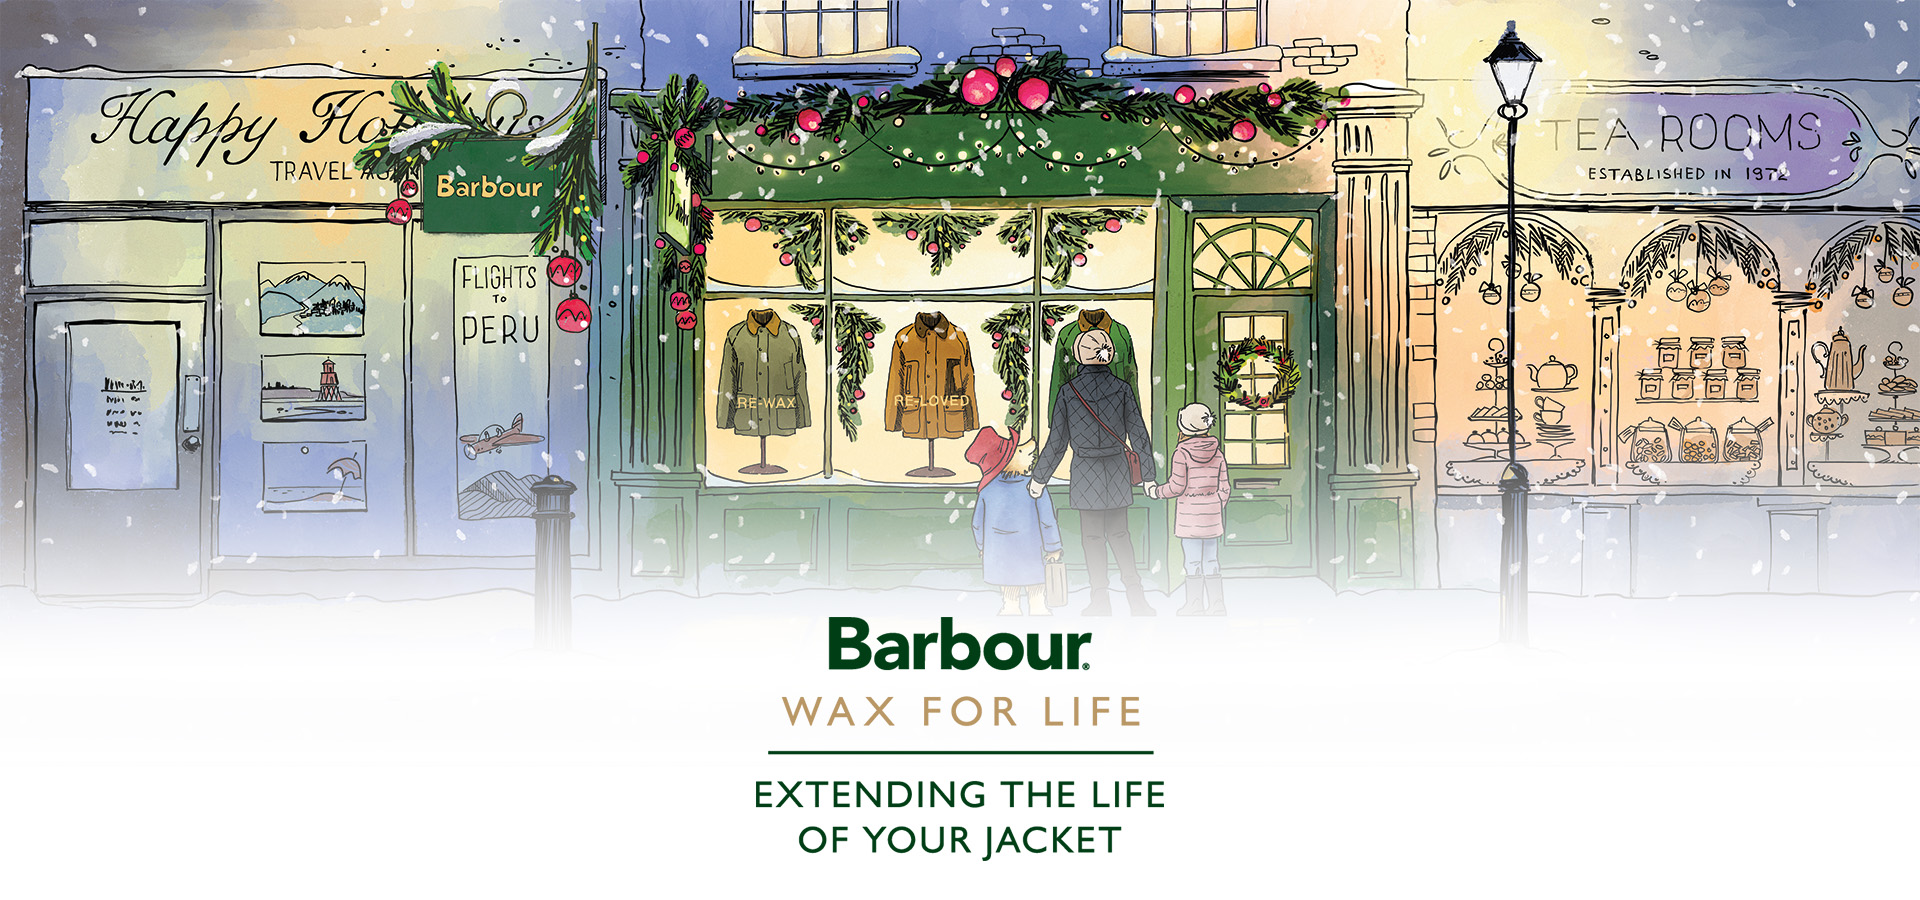 Barbour Wax For Life over 100 years of sustainability